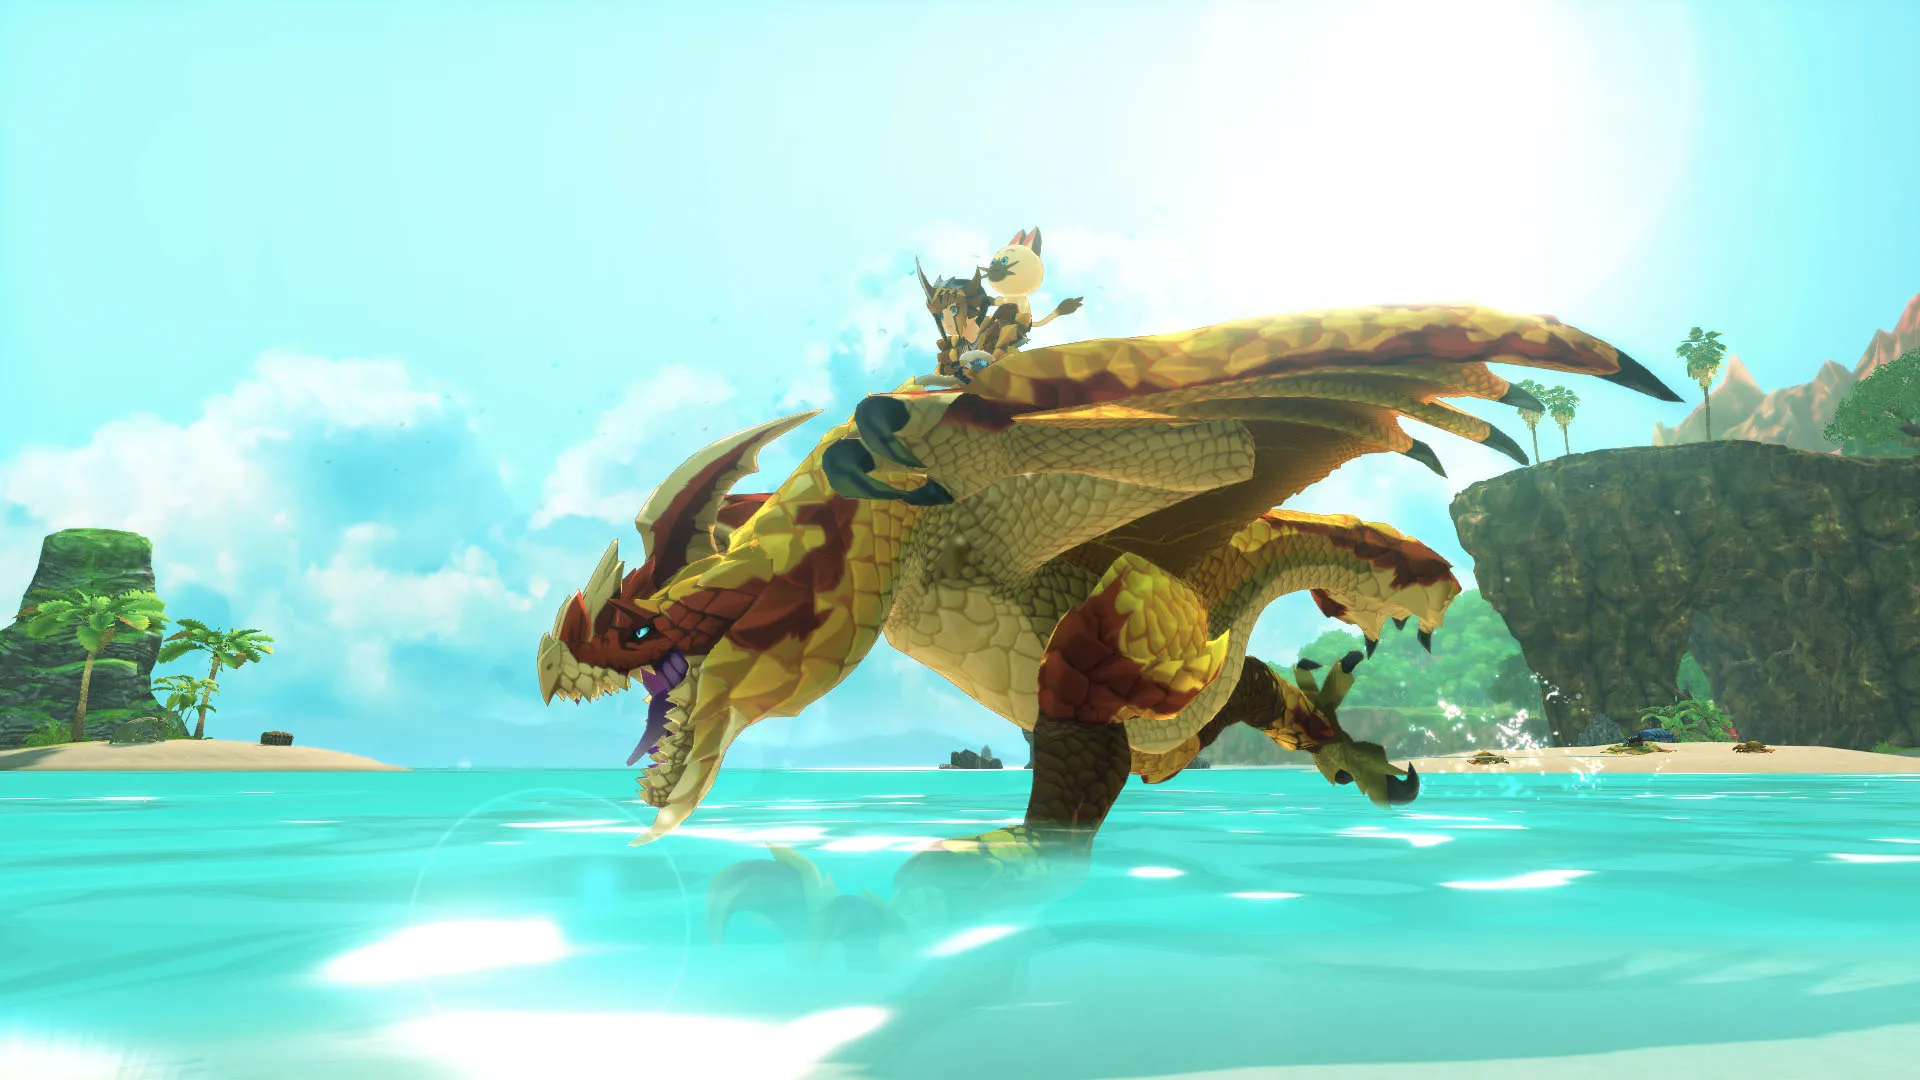 monster-hunter-stories-2-gets-tons-of-screenshots-art-gameplay-from-upcoming-demo